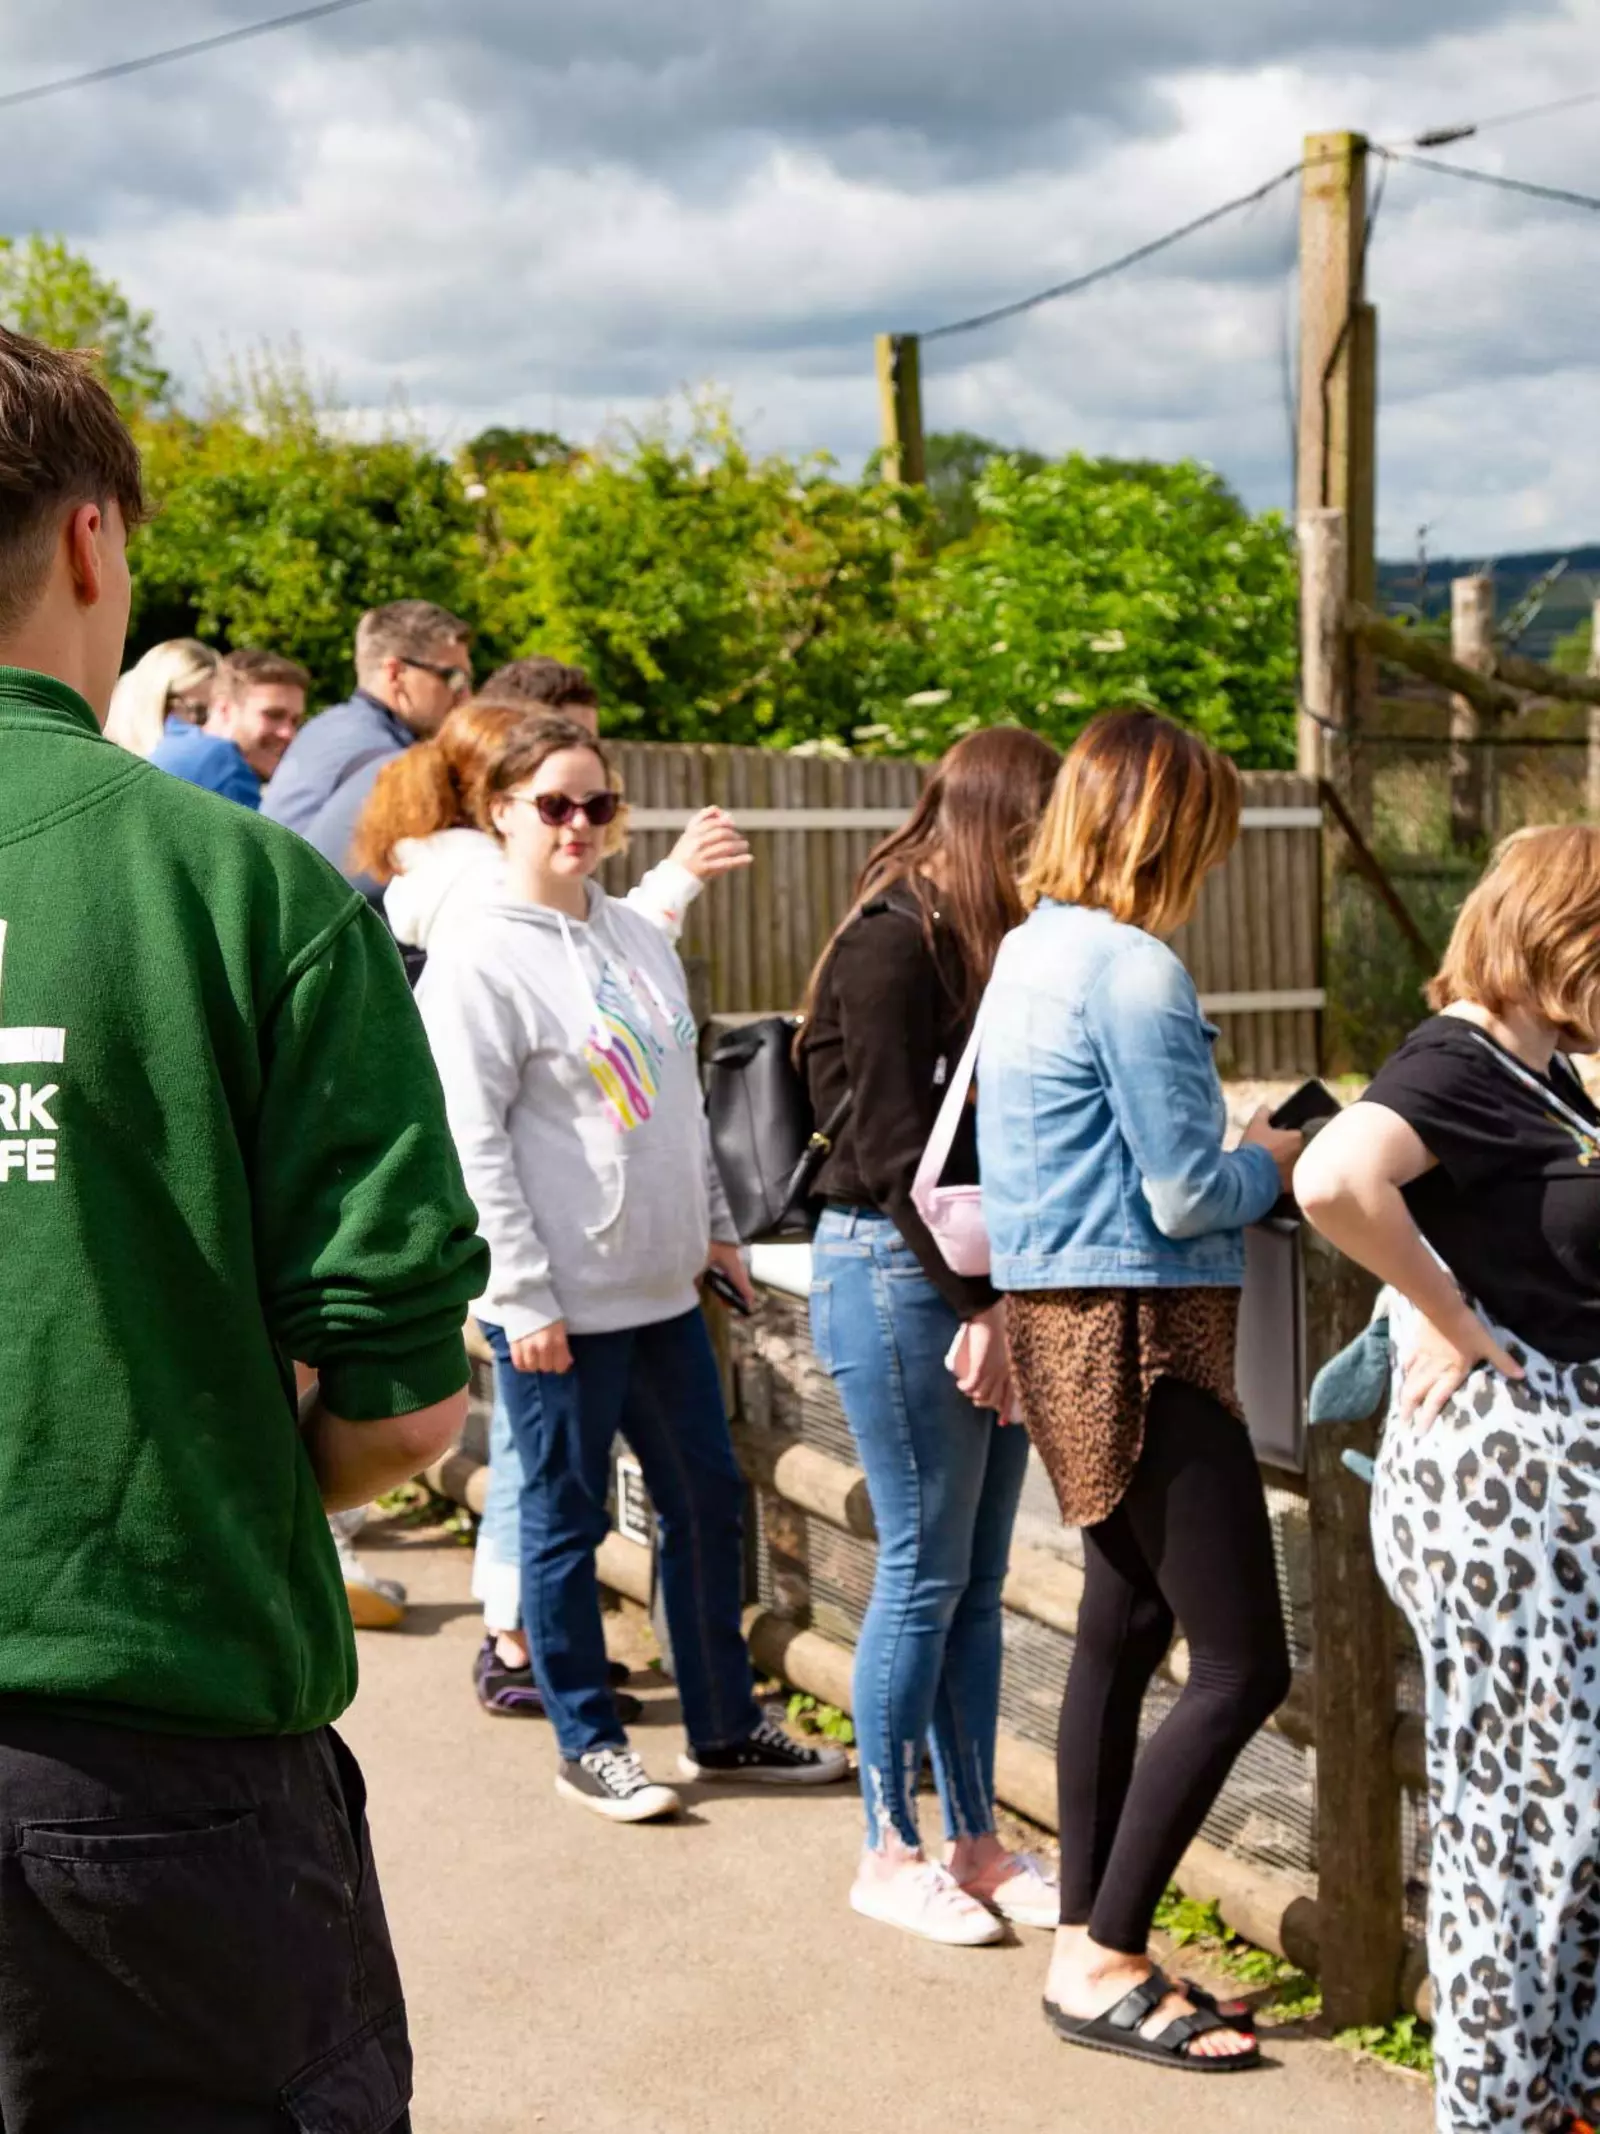 Tours at Lookout Lodge by penguins at Whipsnade Zoo